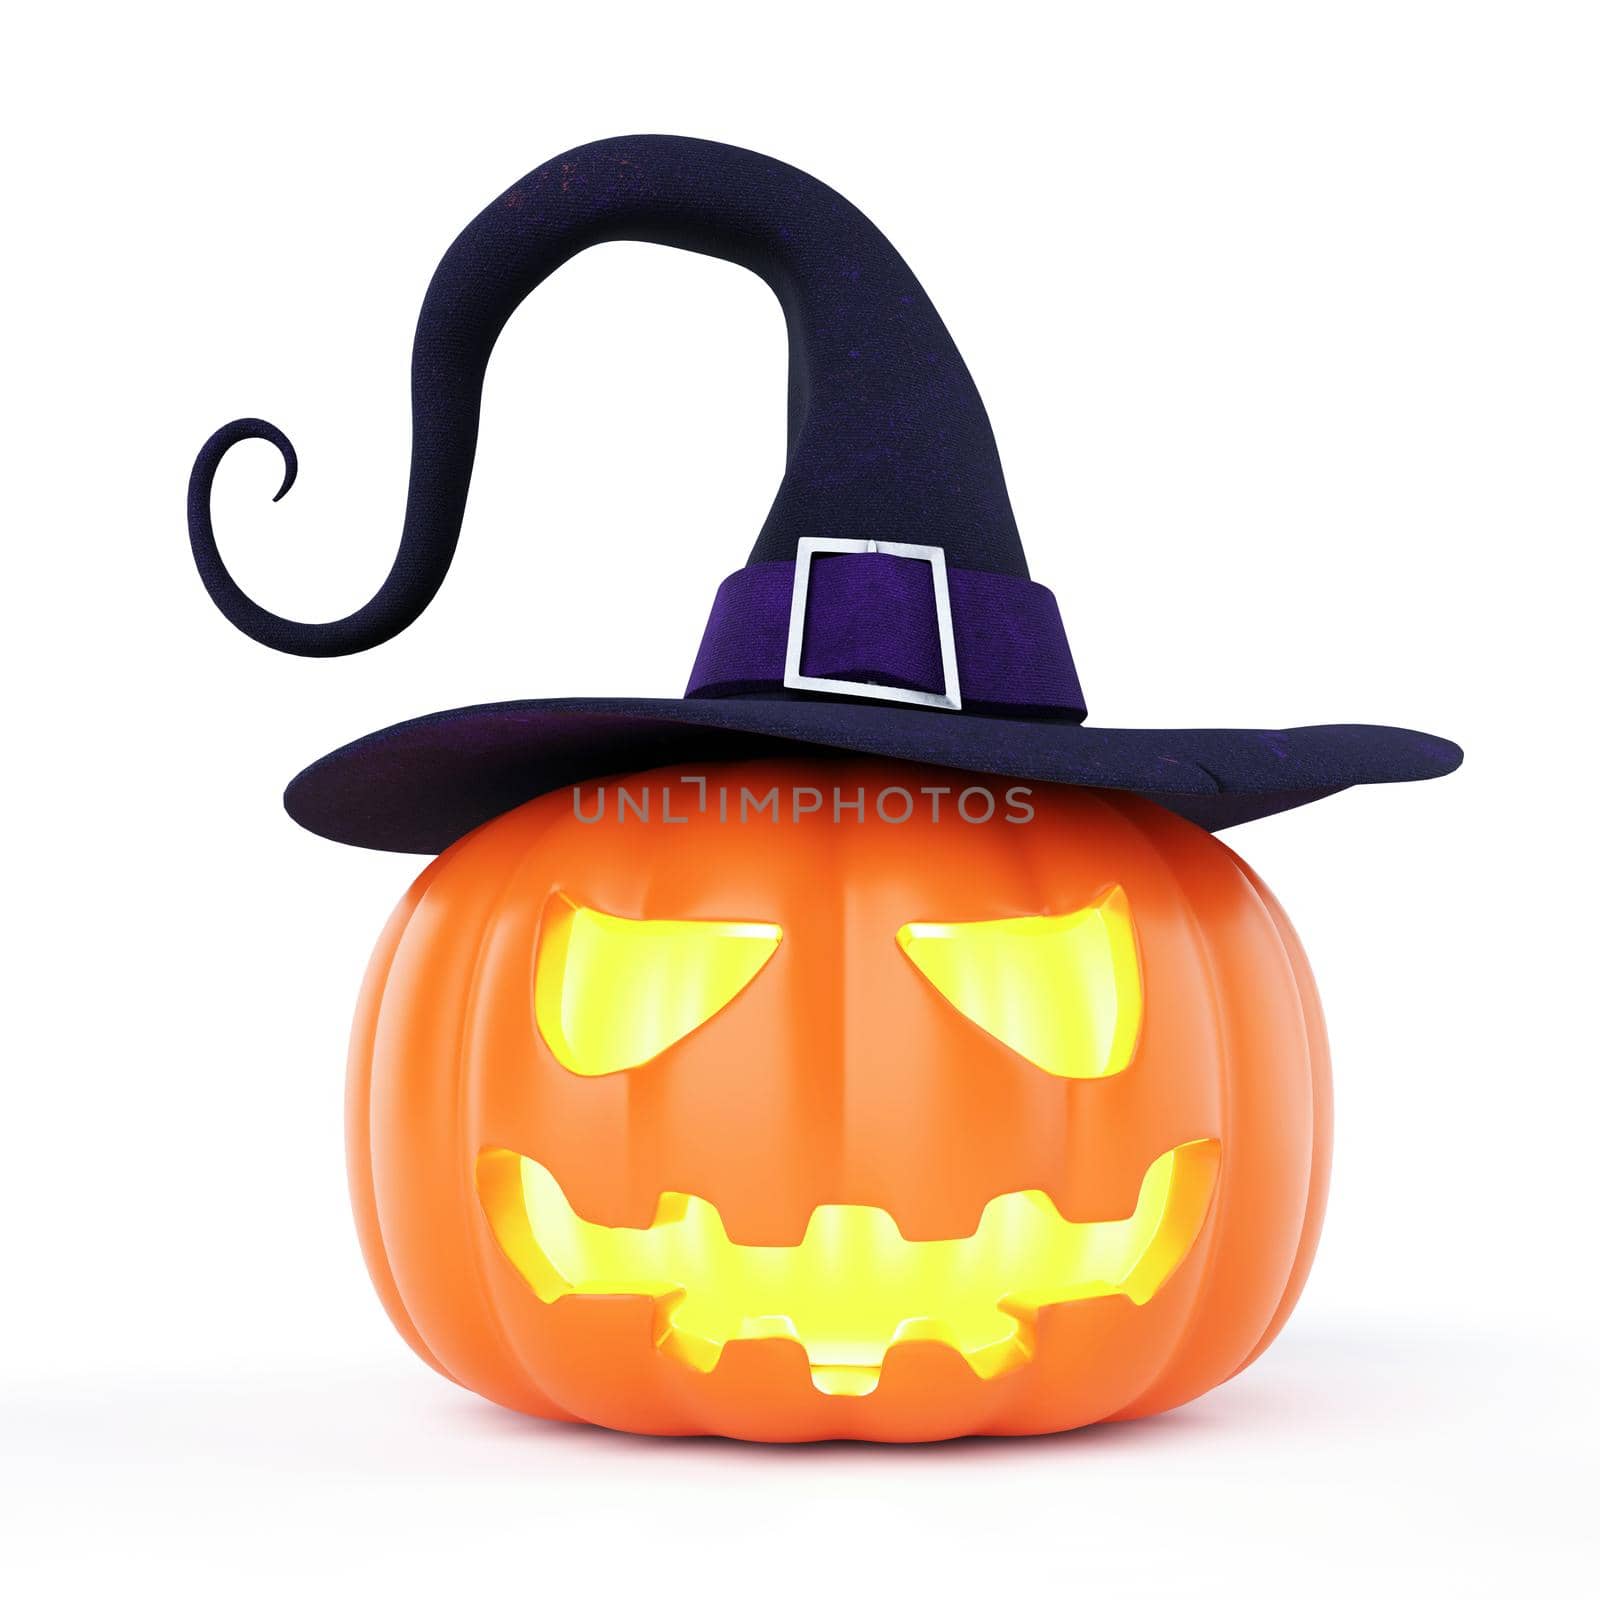 Halloween Jack O Lantern pumpkin with candlelight inside and witch hat on isolated white background. Object and holiday festival concept. 3D illustration rendering by MiniStocker